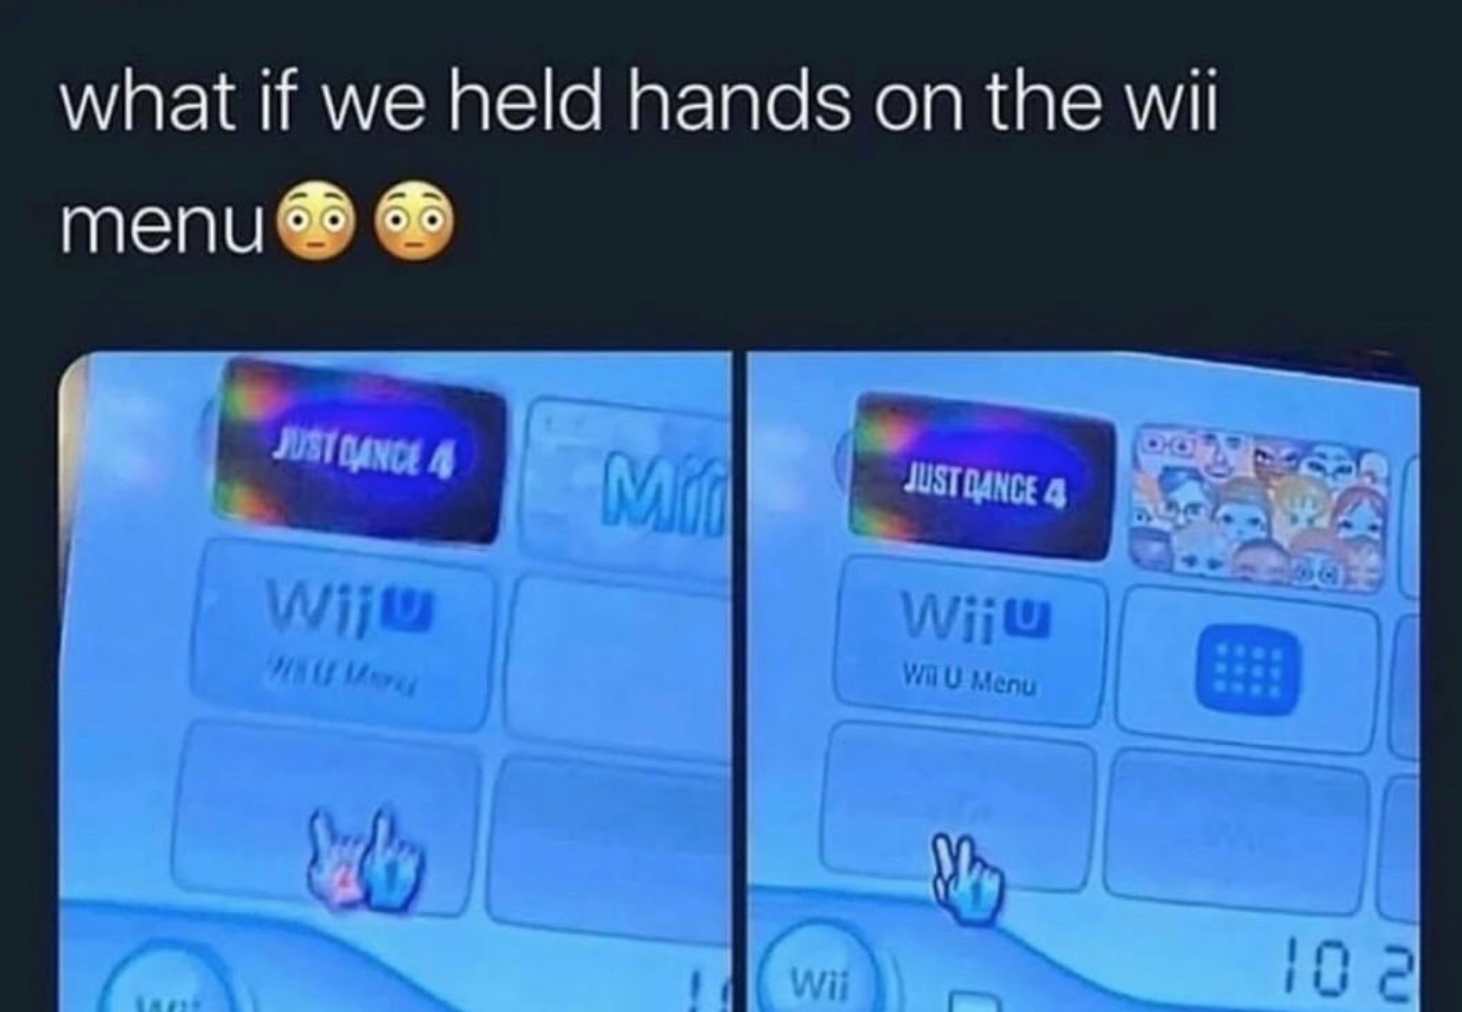 funny gaming memes - electronics - what if we held hands on the wii menu 60 Just Gance A Mid Just Dance 4 Wijo Wa U Menu 102 Wii